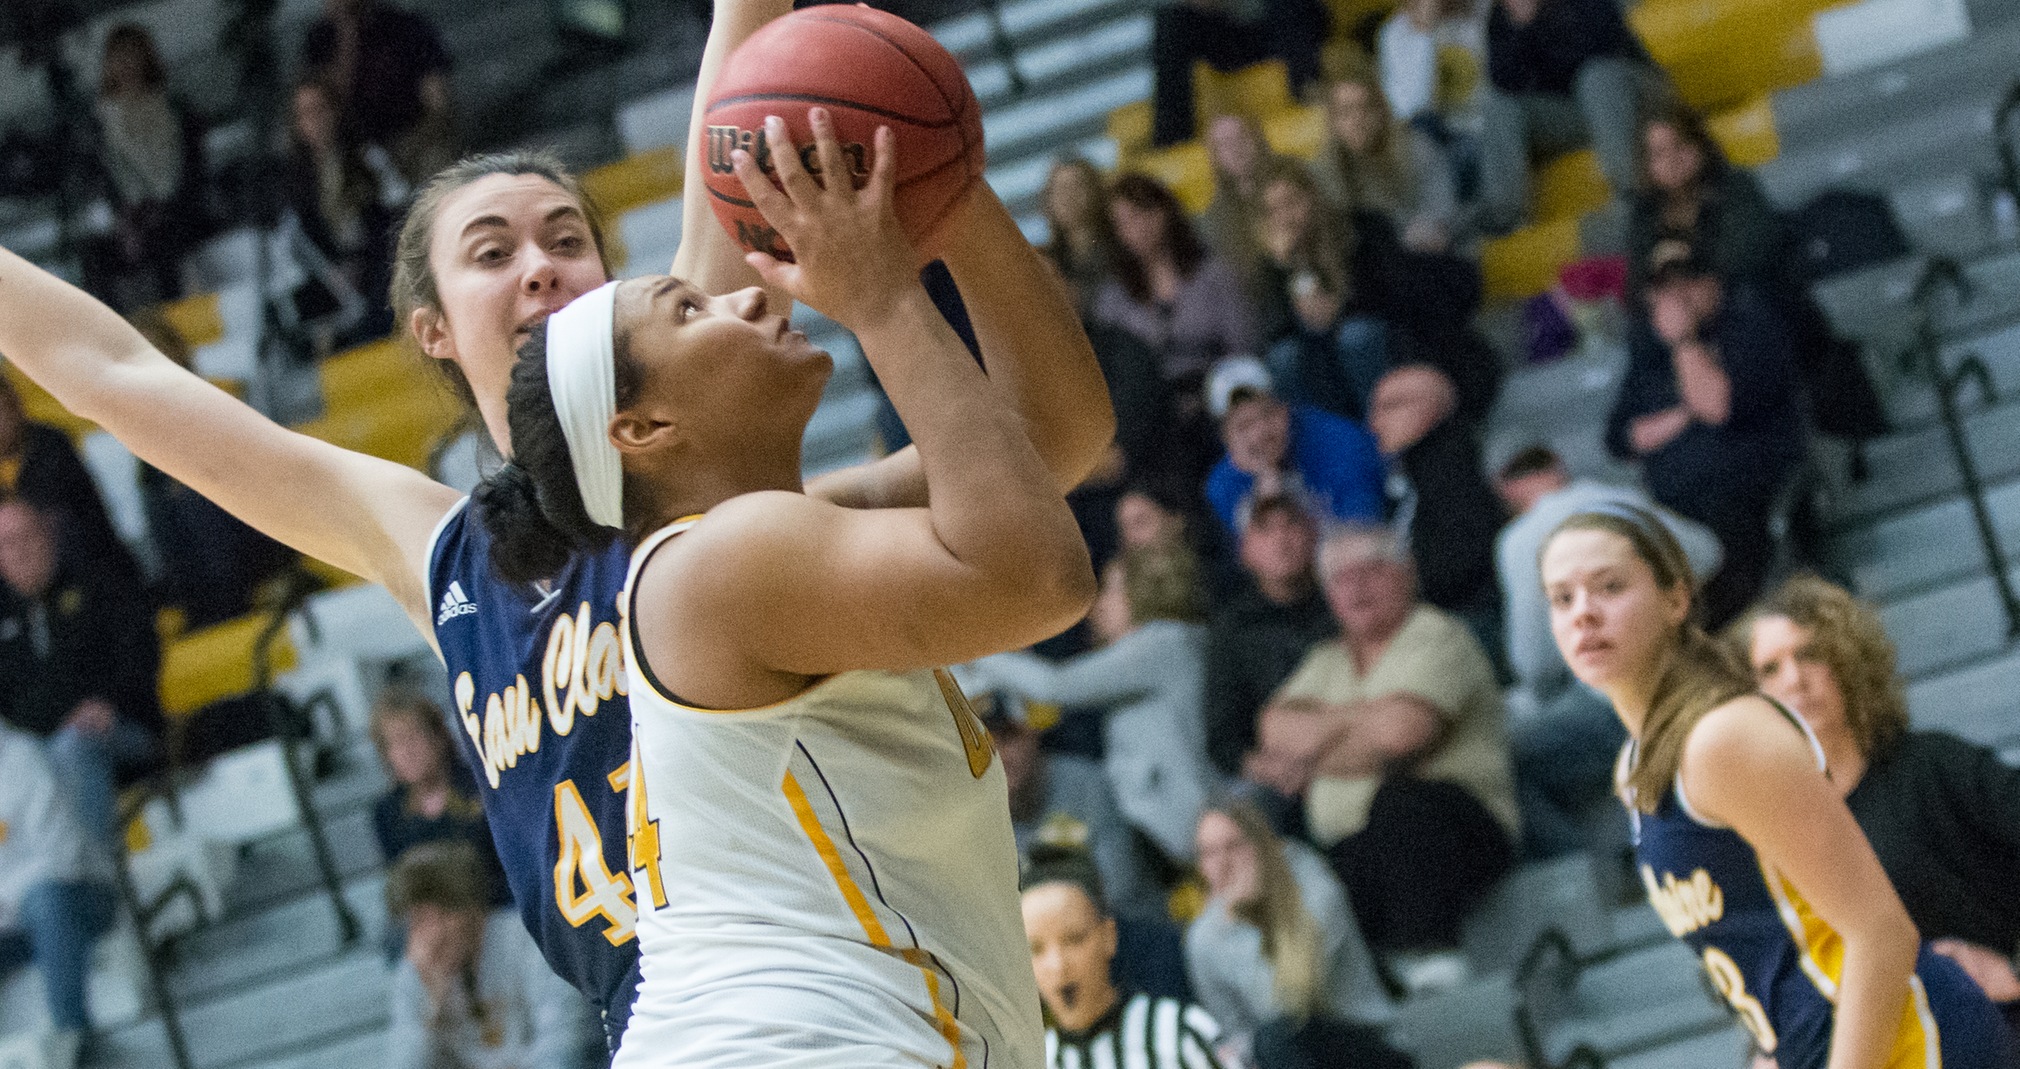 Isabella Samuels scored a season-high 11 points with the help of 5-of-6 shooting from the field.